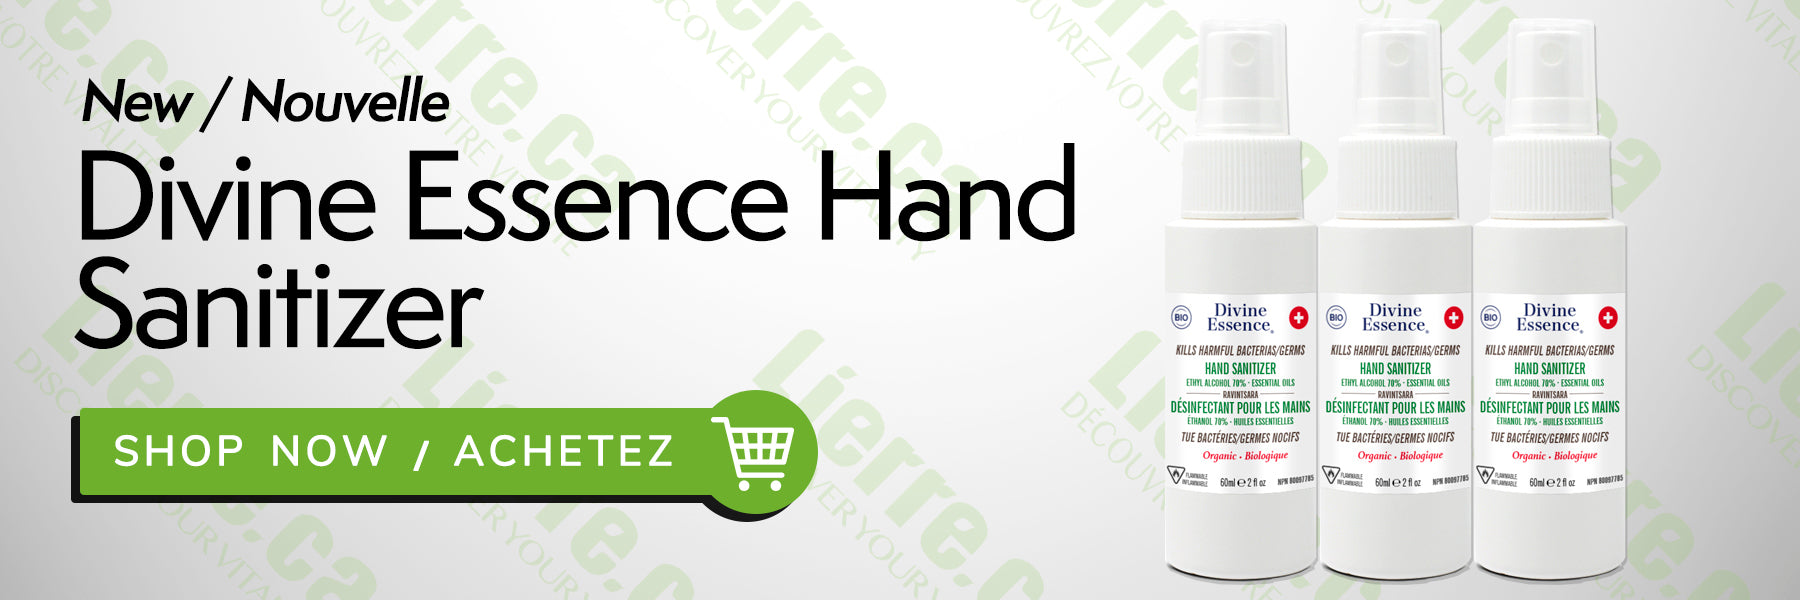 Why Hand Sanitizer Might Be Better at Preventing Virus Transmission than Soap and Water